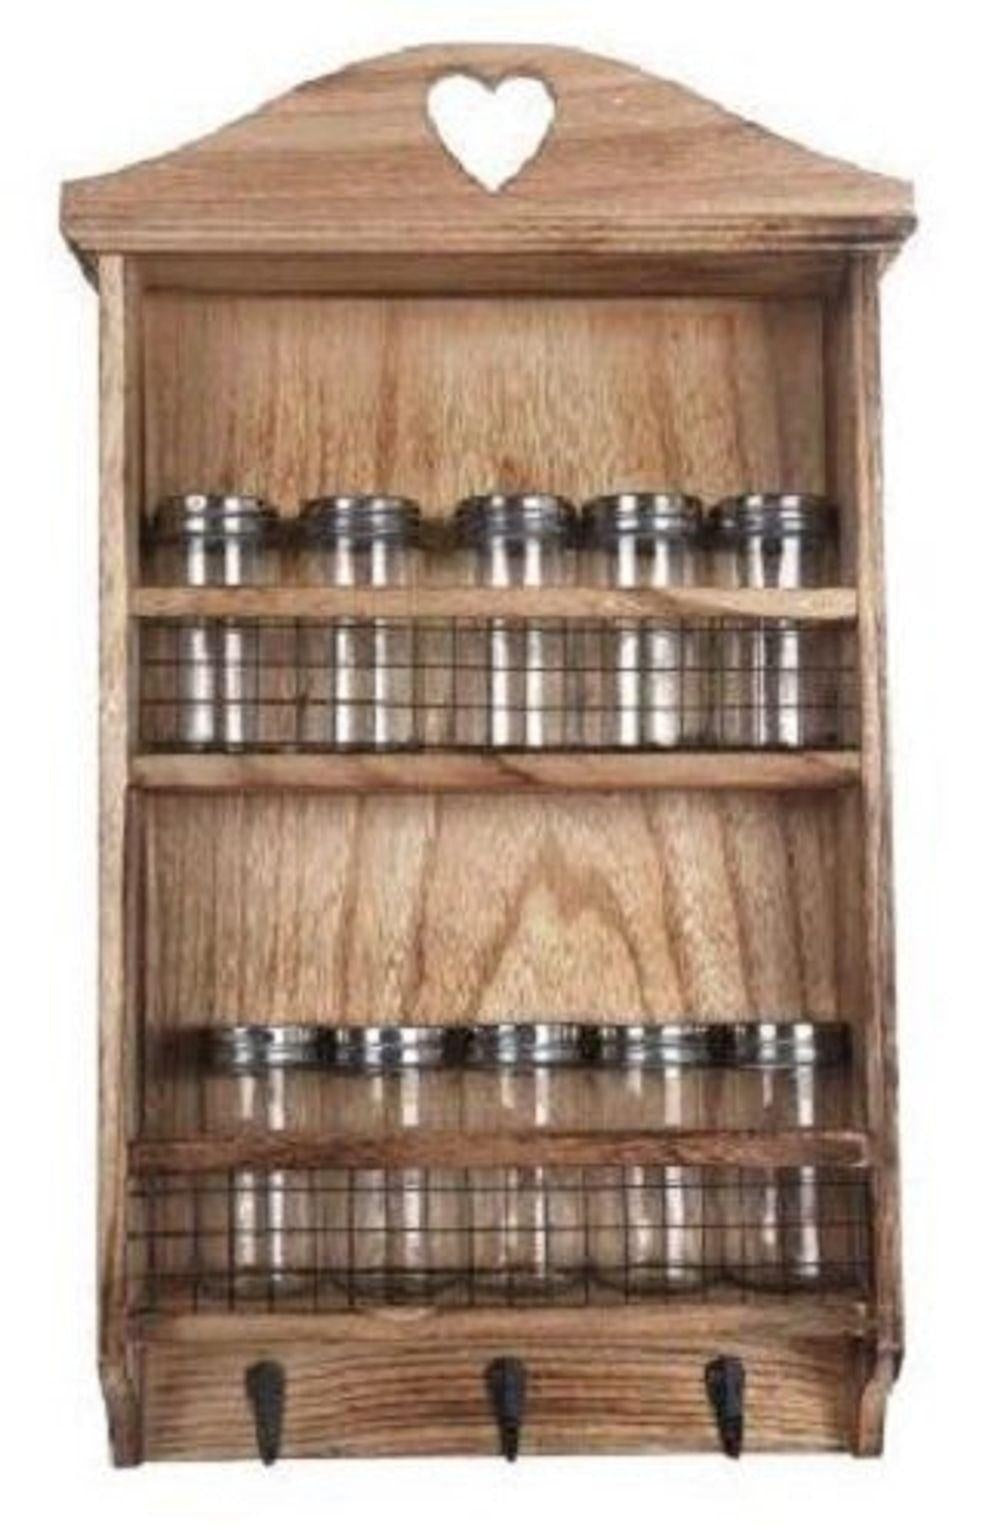 Wooden Spice Wall Rack 48 cm x 26cm with jars